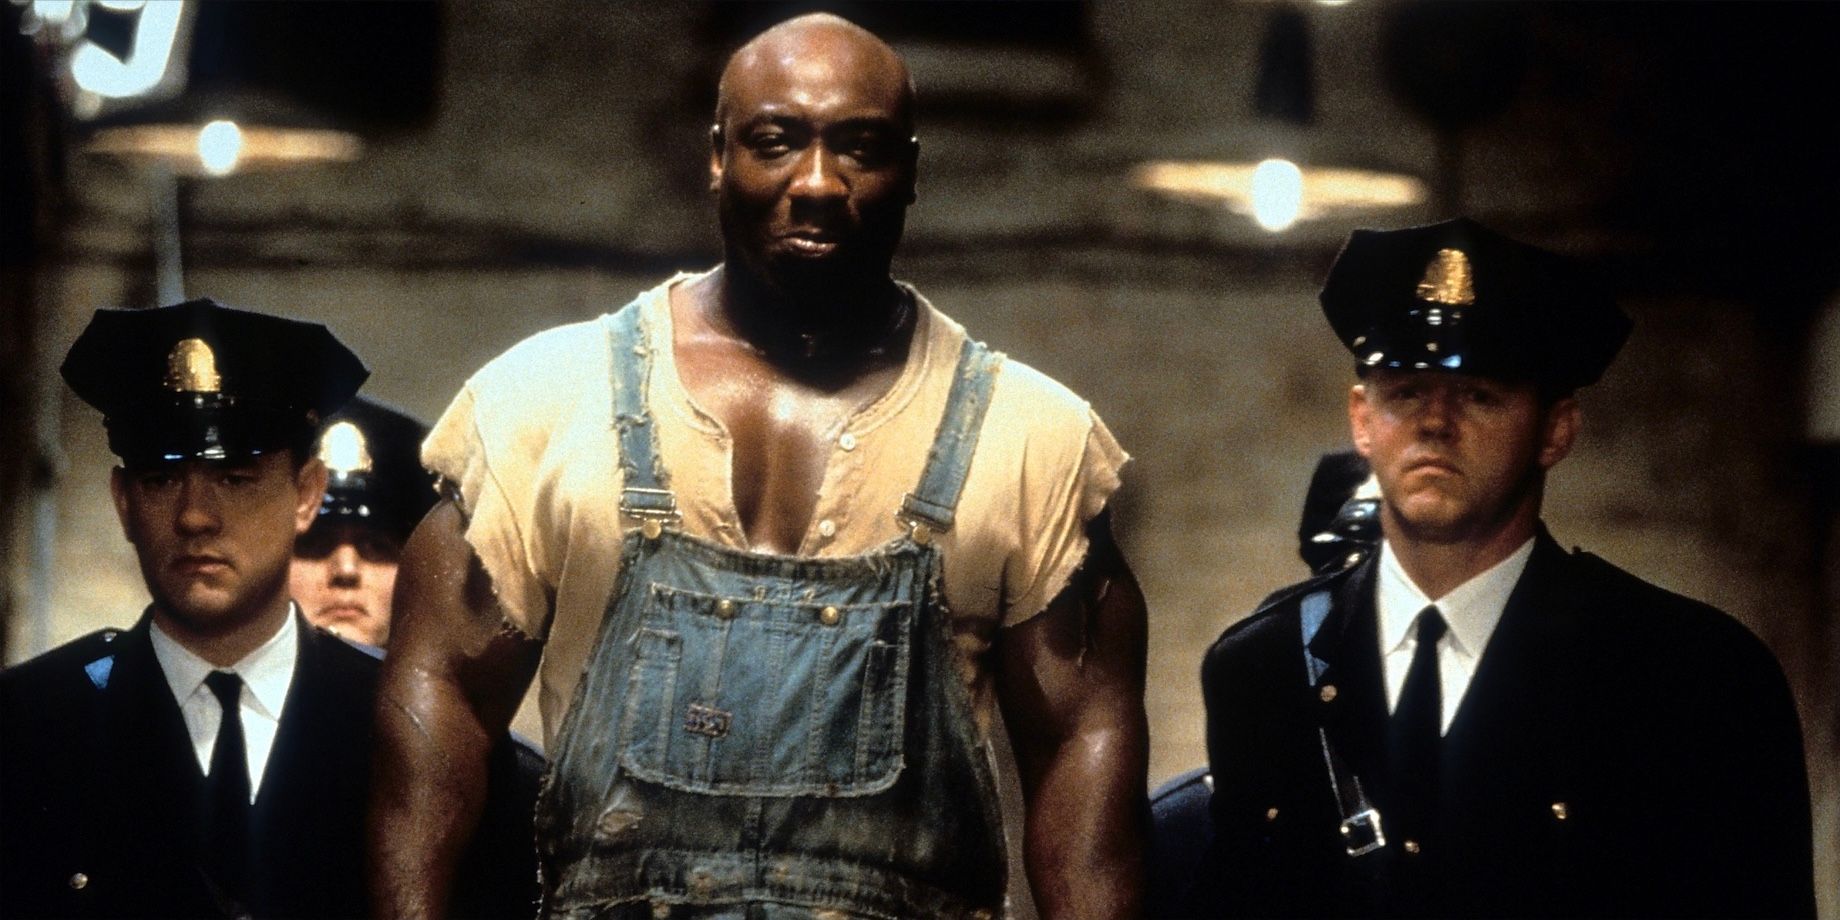 Tom Hanks walking with Michael Clarke Duncan in The Green Mile (1999).